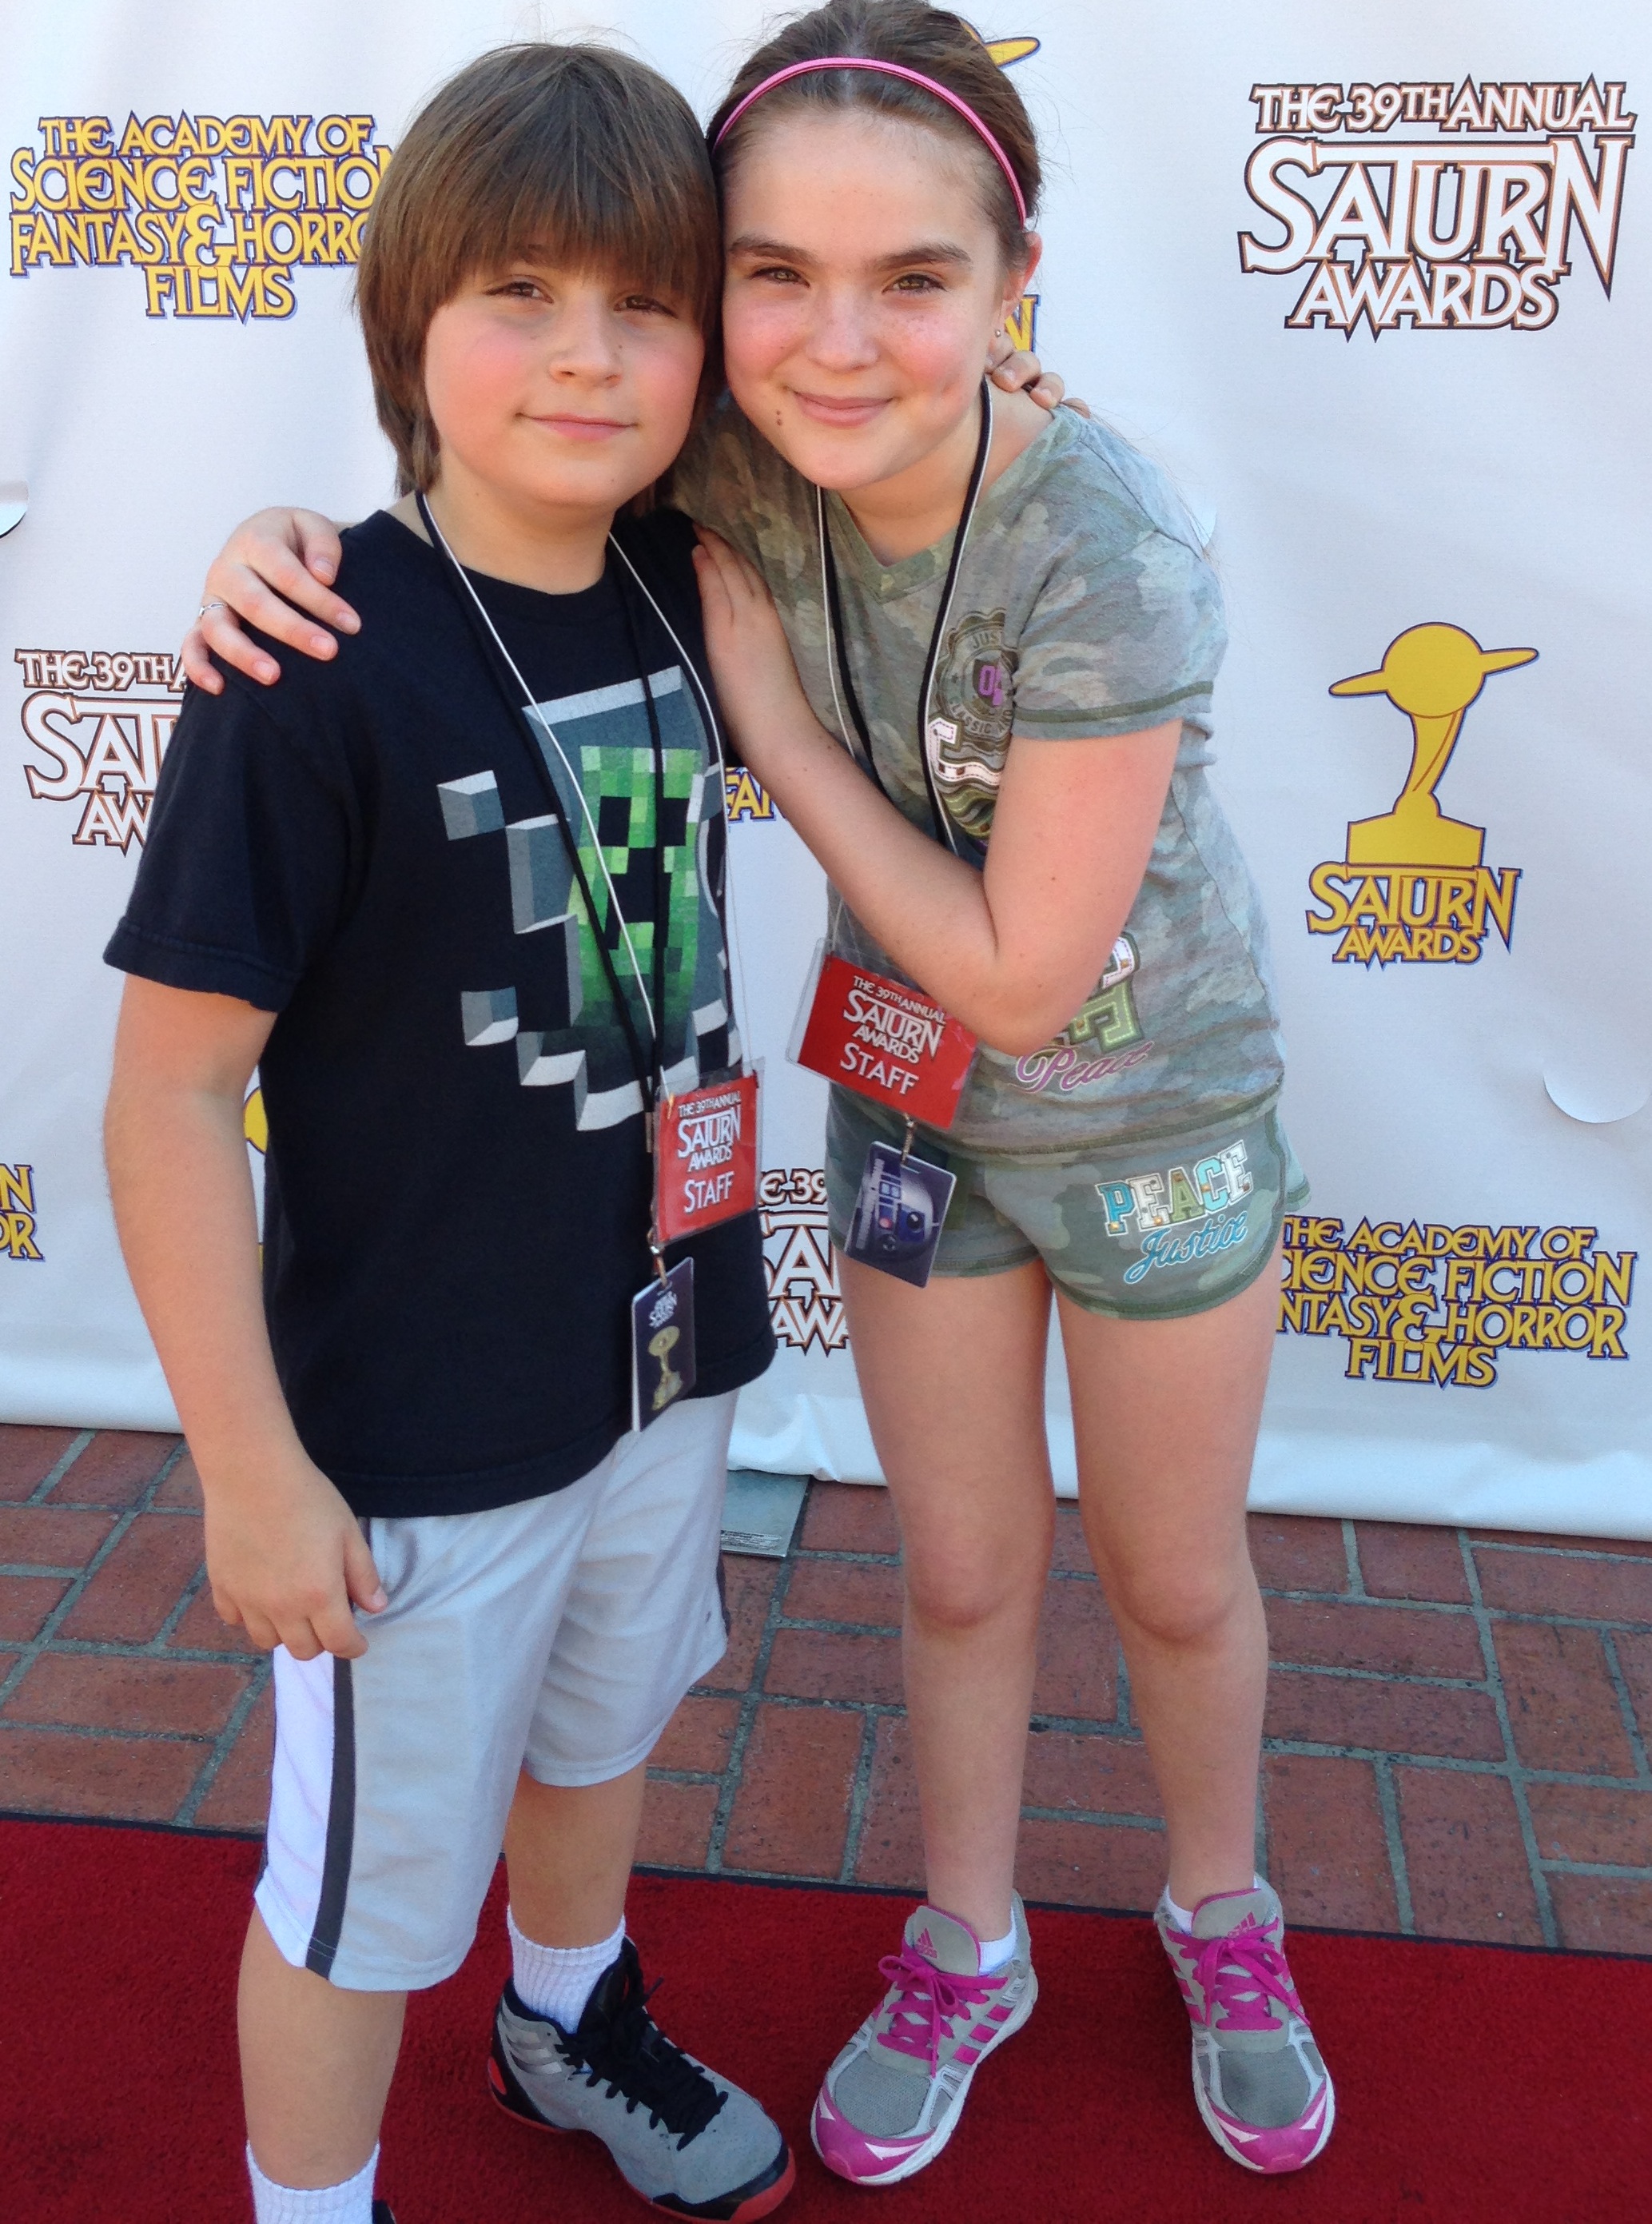 Stone Eisenmann & HannaH Eisenmann on the Red Carpet at the 2013 Saturn Awards. (They are the Ewoks everyone was talking about)